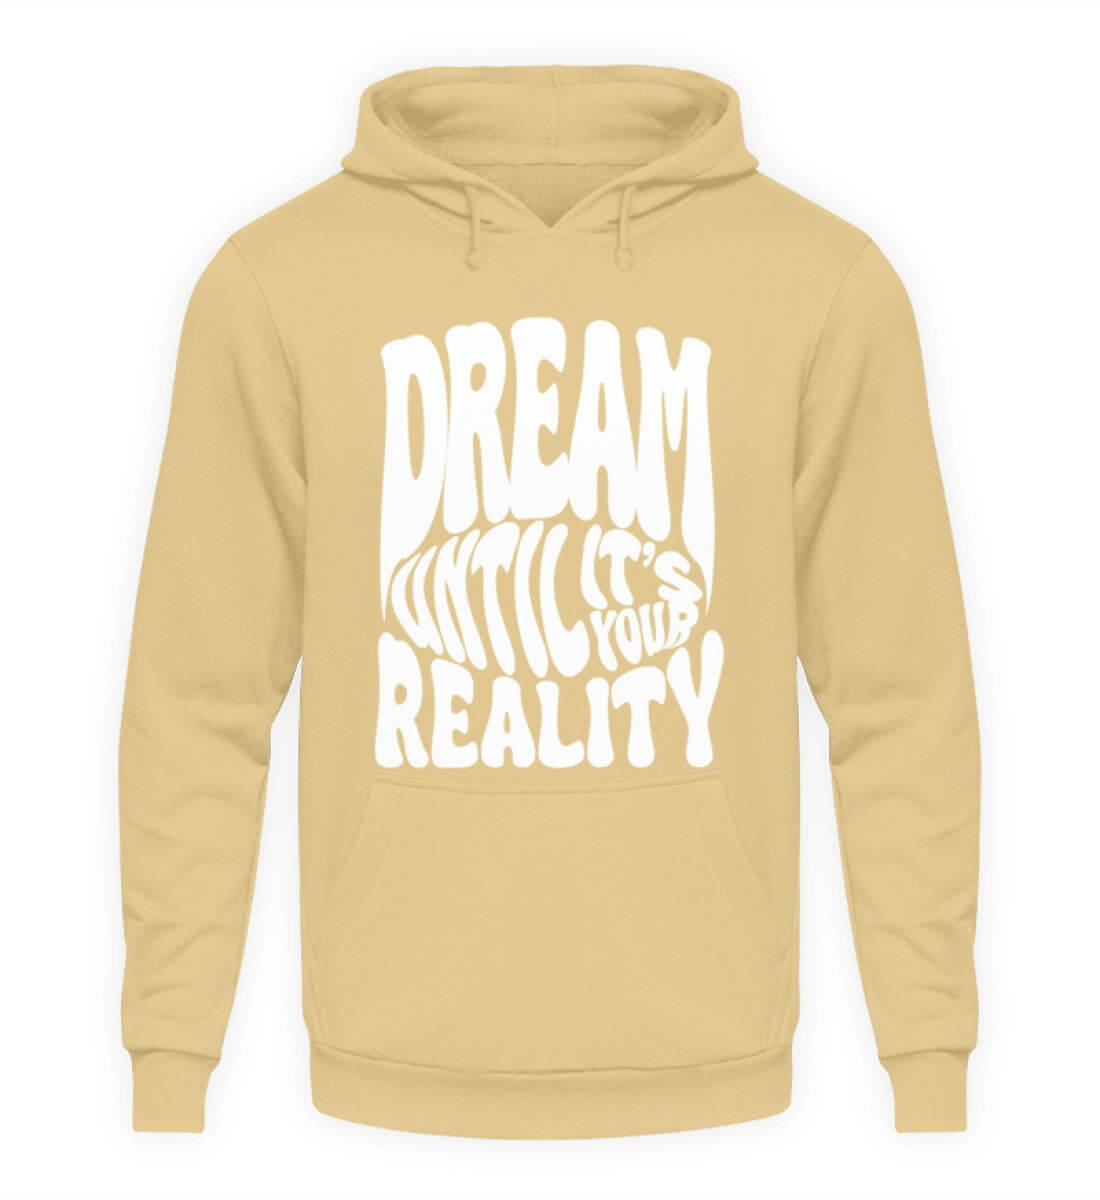 'DREAM UNTIL IT'S YOUR REALITY' - Unisex Kapuzenpullover Hoodie - GODVIBES